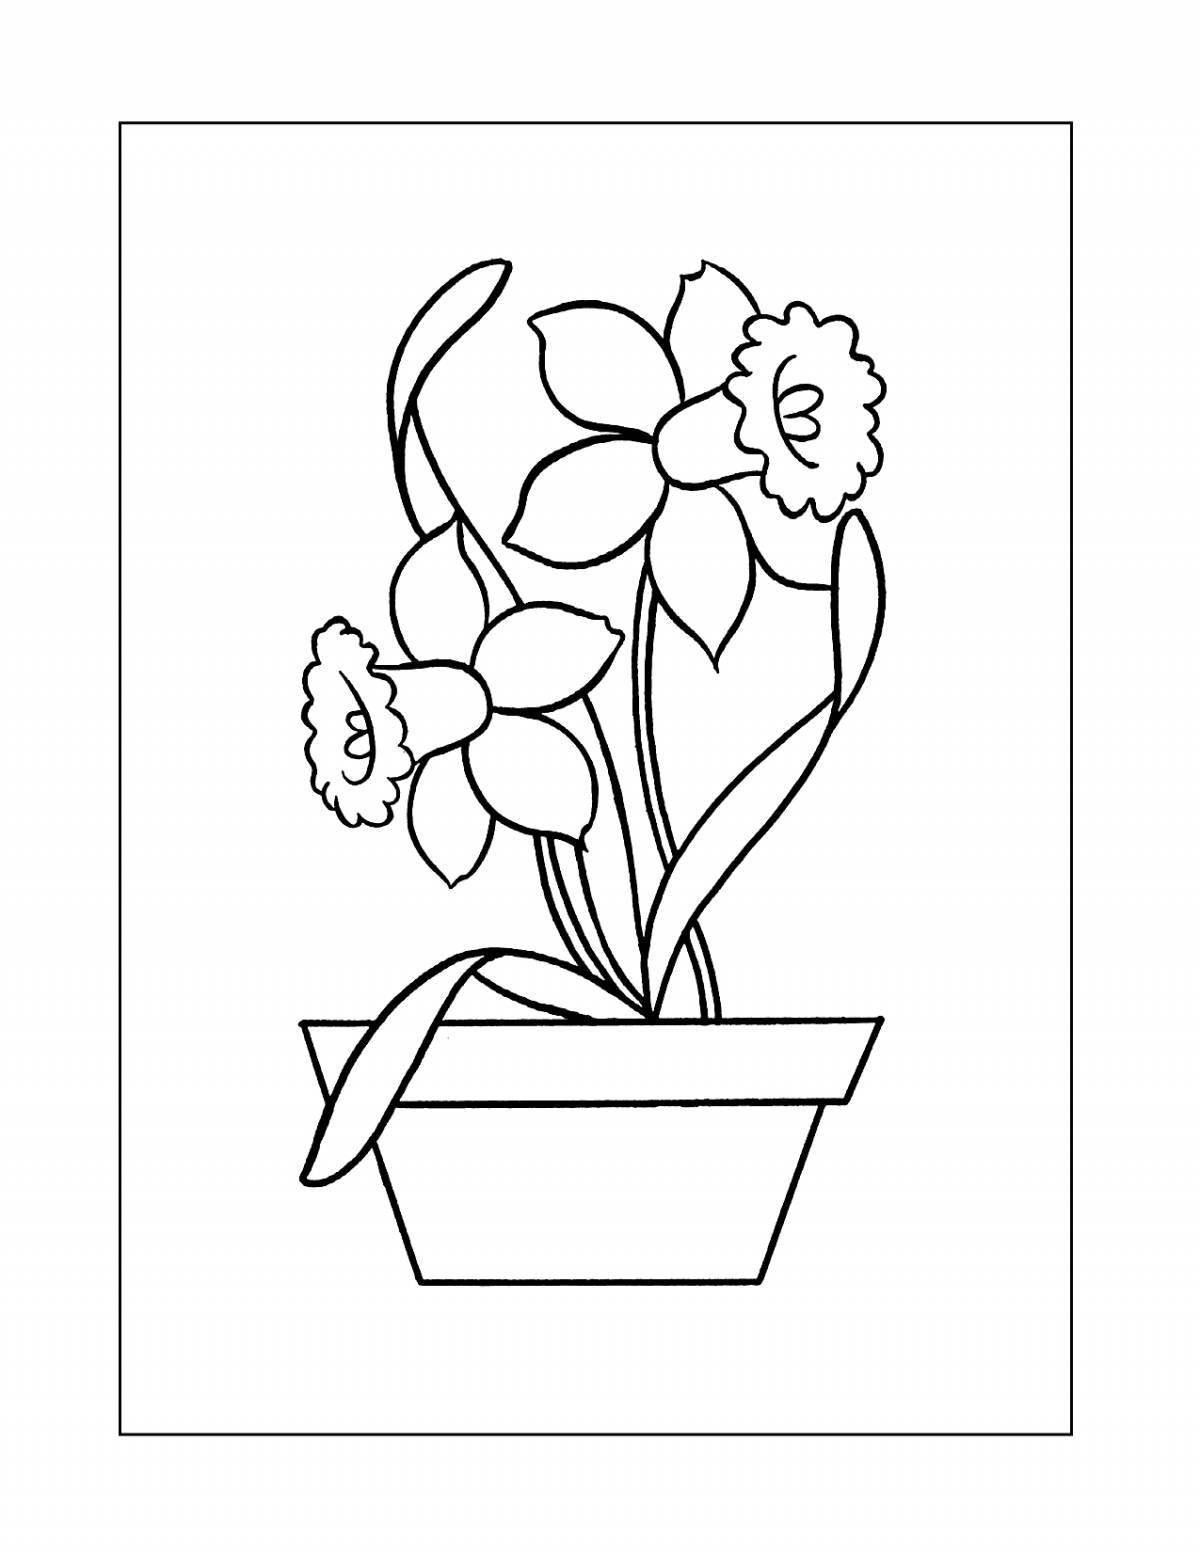 Coloring page glowing purple houseplants